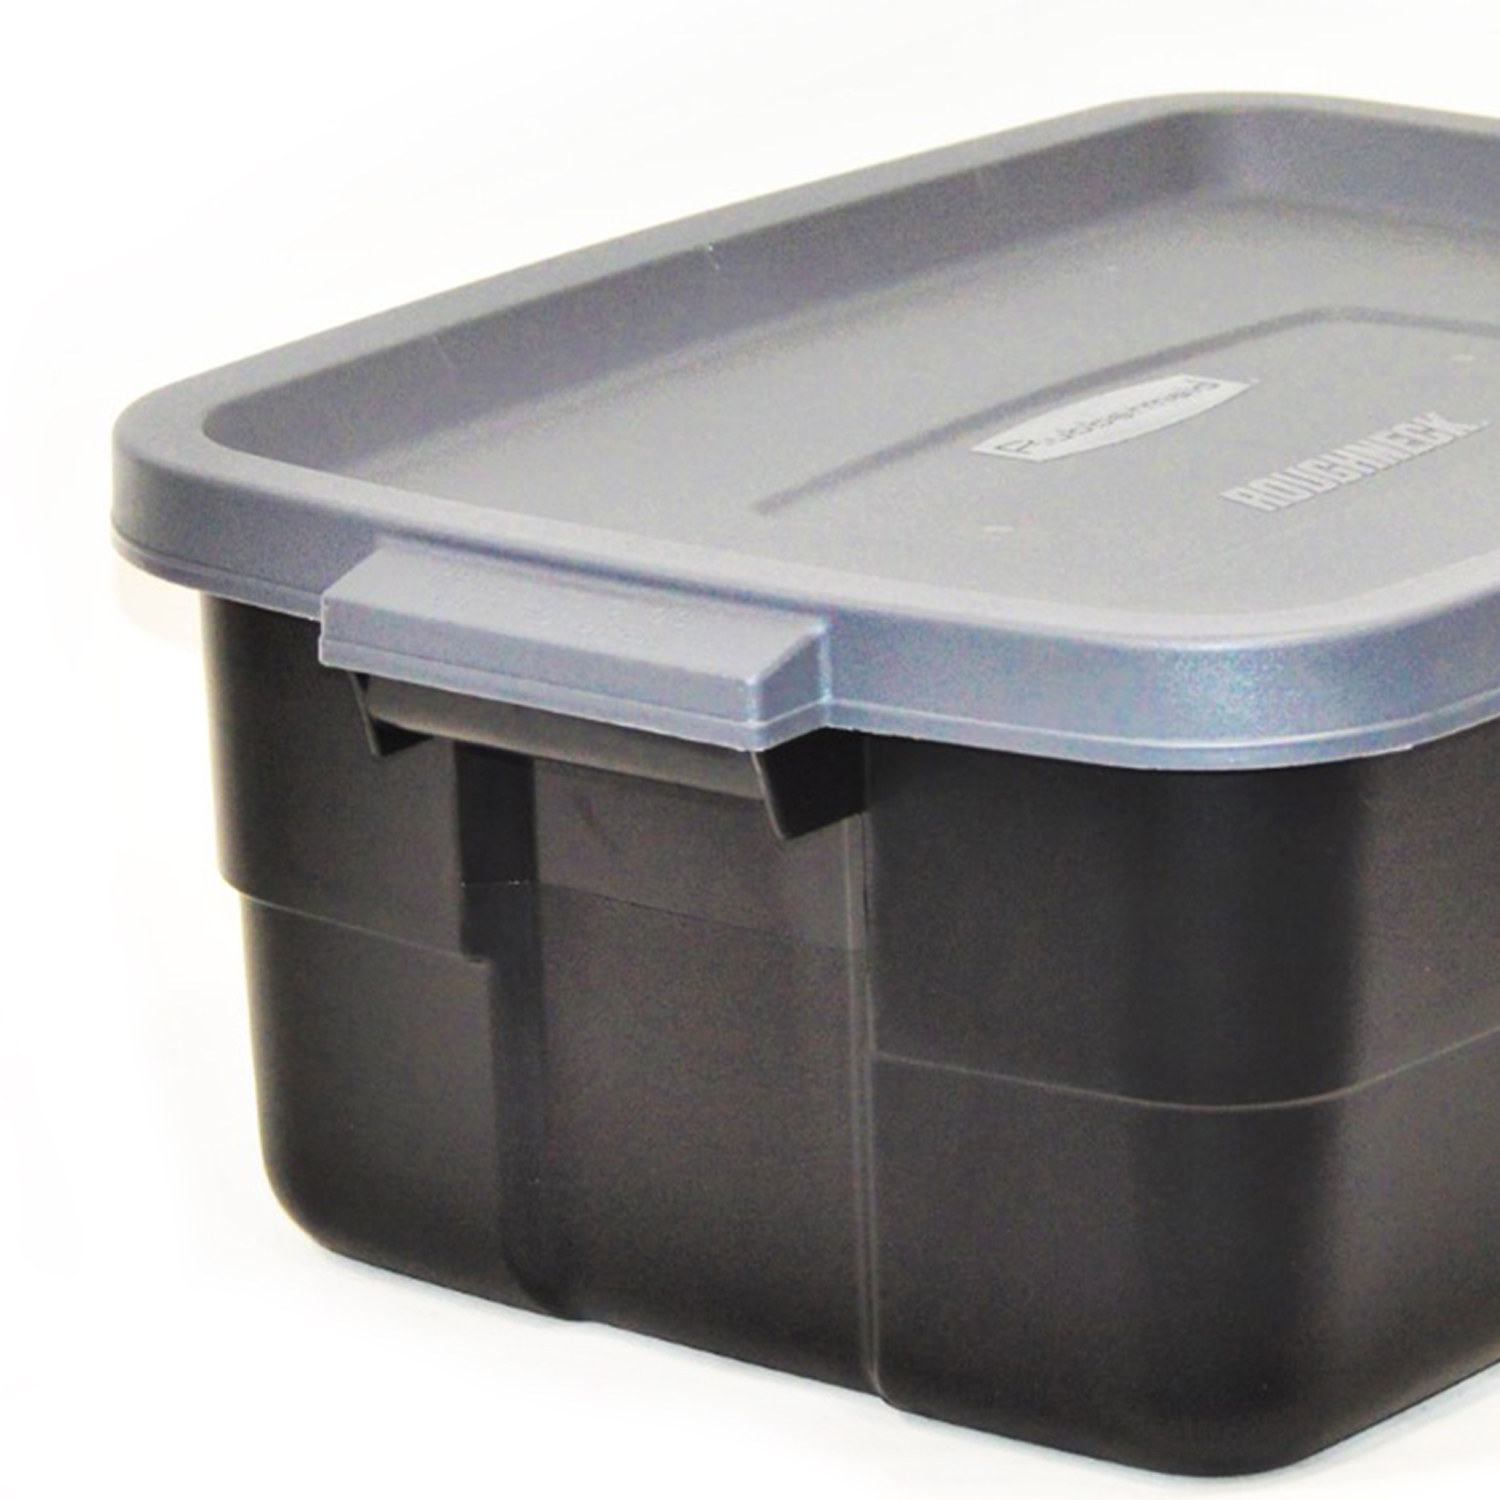 Rubbermaid Roughneck Tote 10 Gal Storage Container, Black/Gray (6 Pack) - image 3 of 7